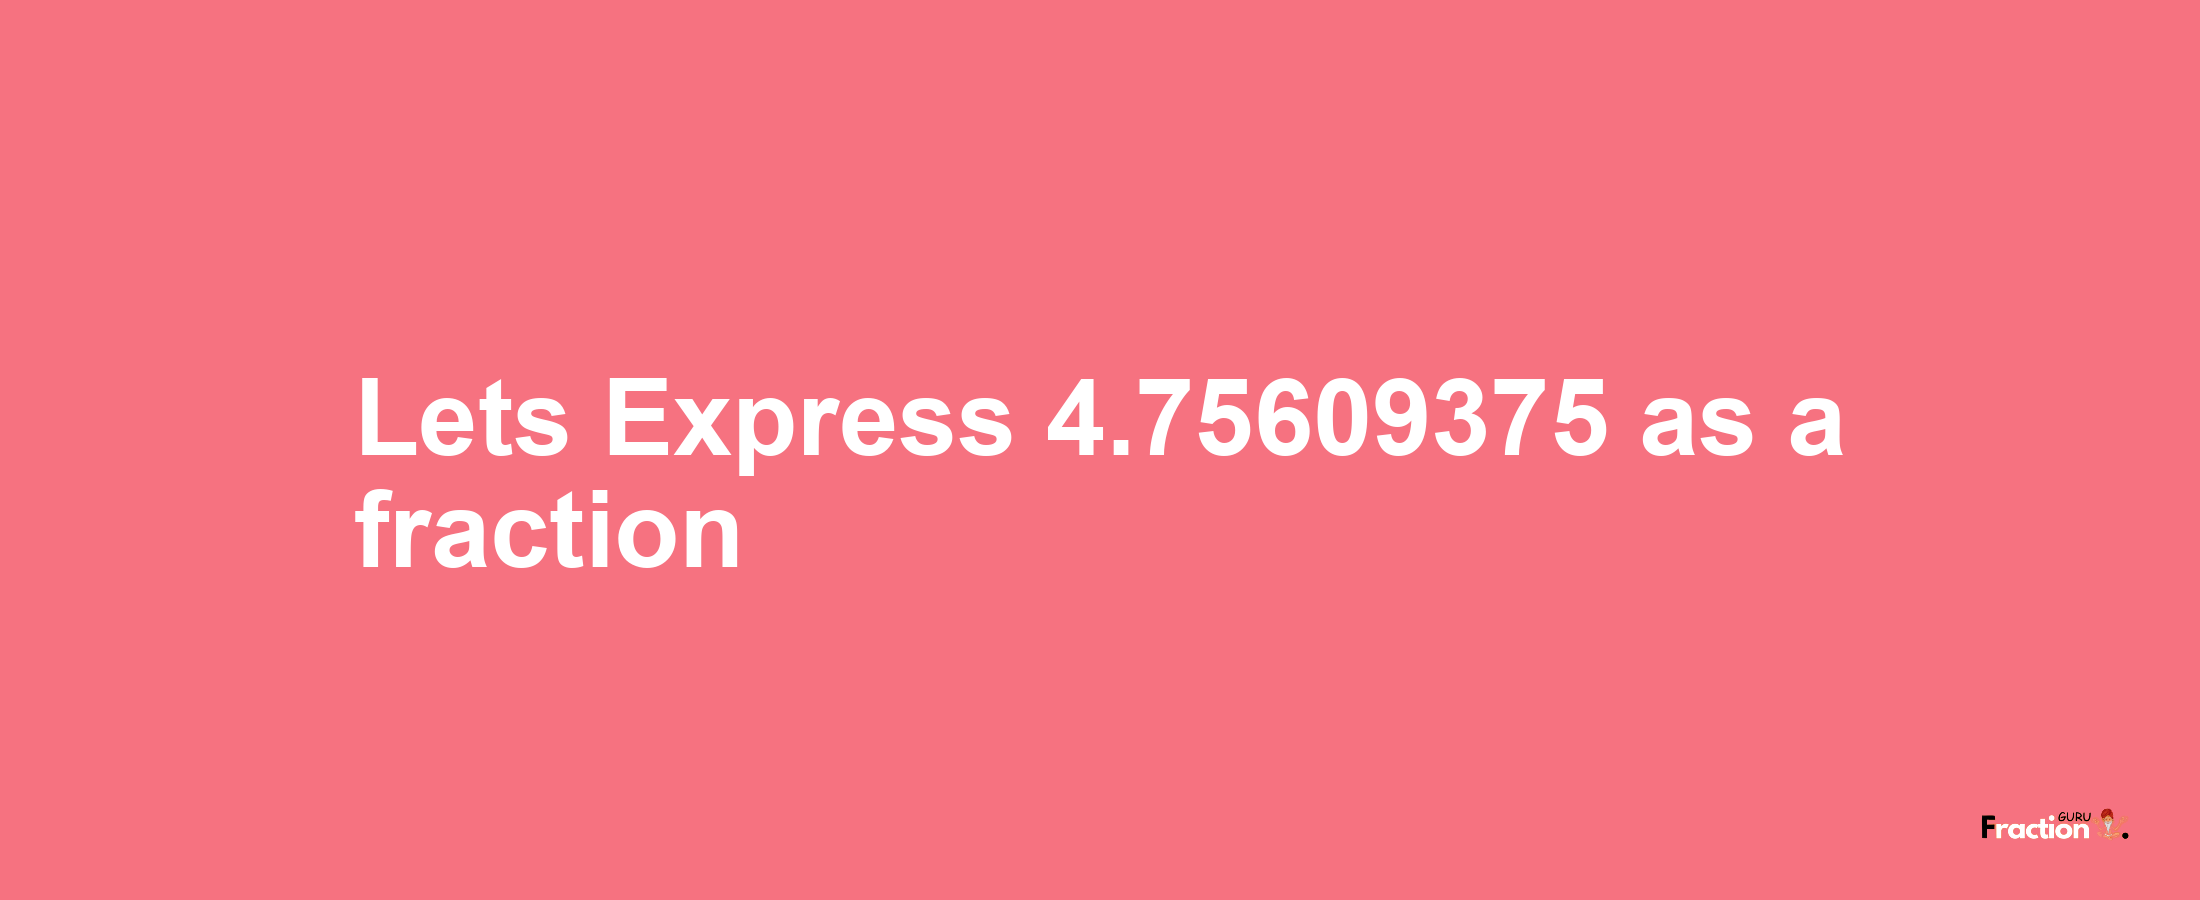 Lets Express 4.75609375 as afraction